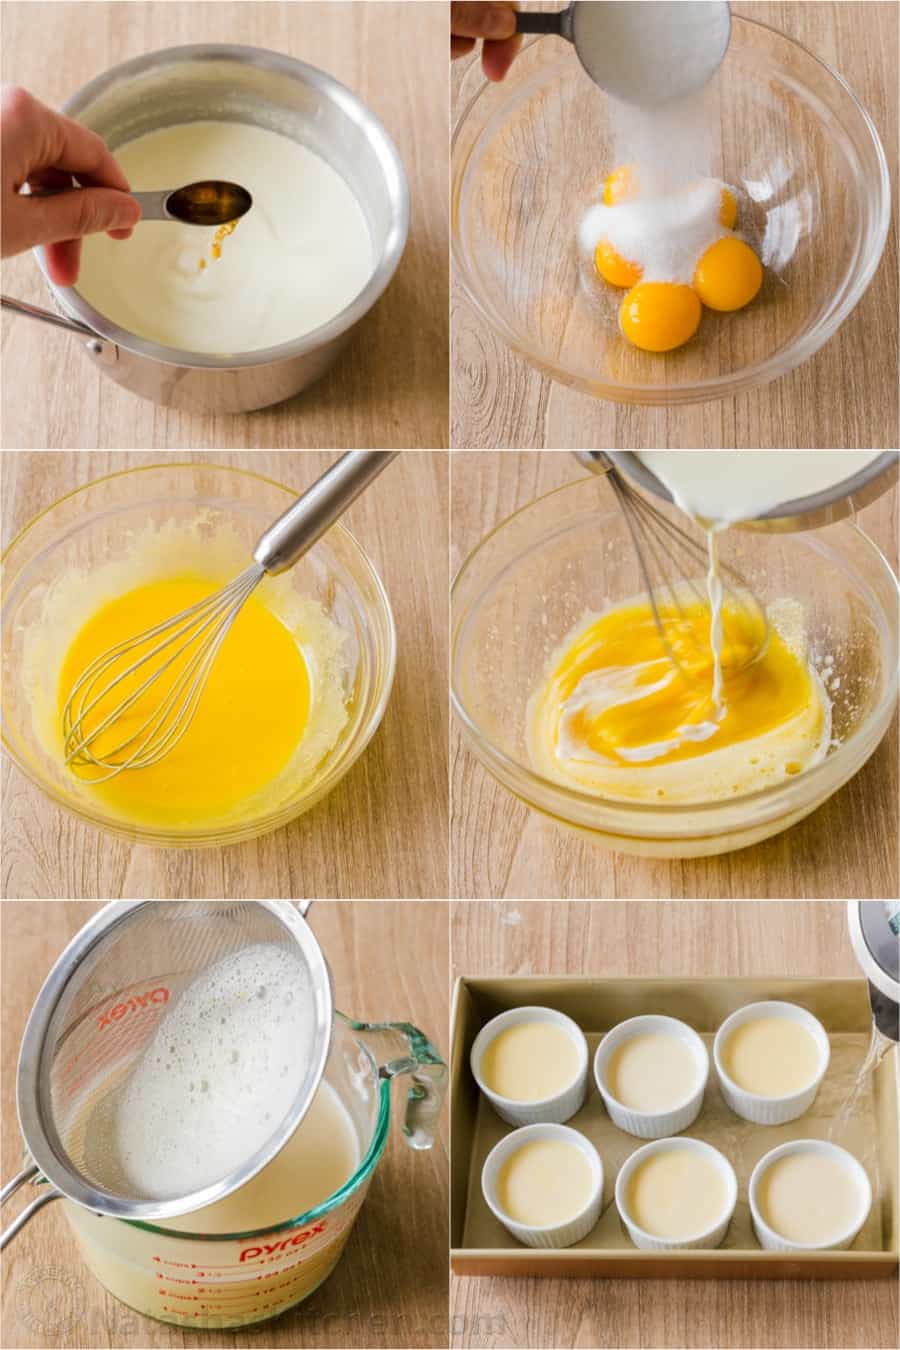 Photo collage showing the process for preparing creme brulee in ramekins.